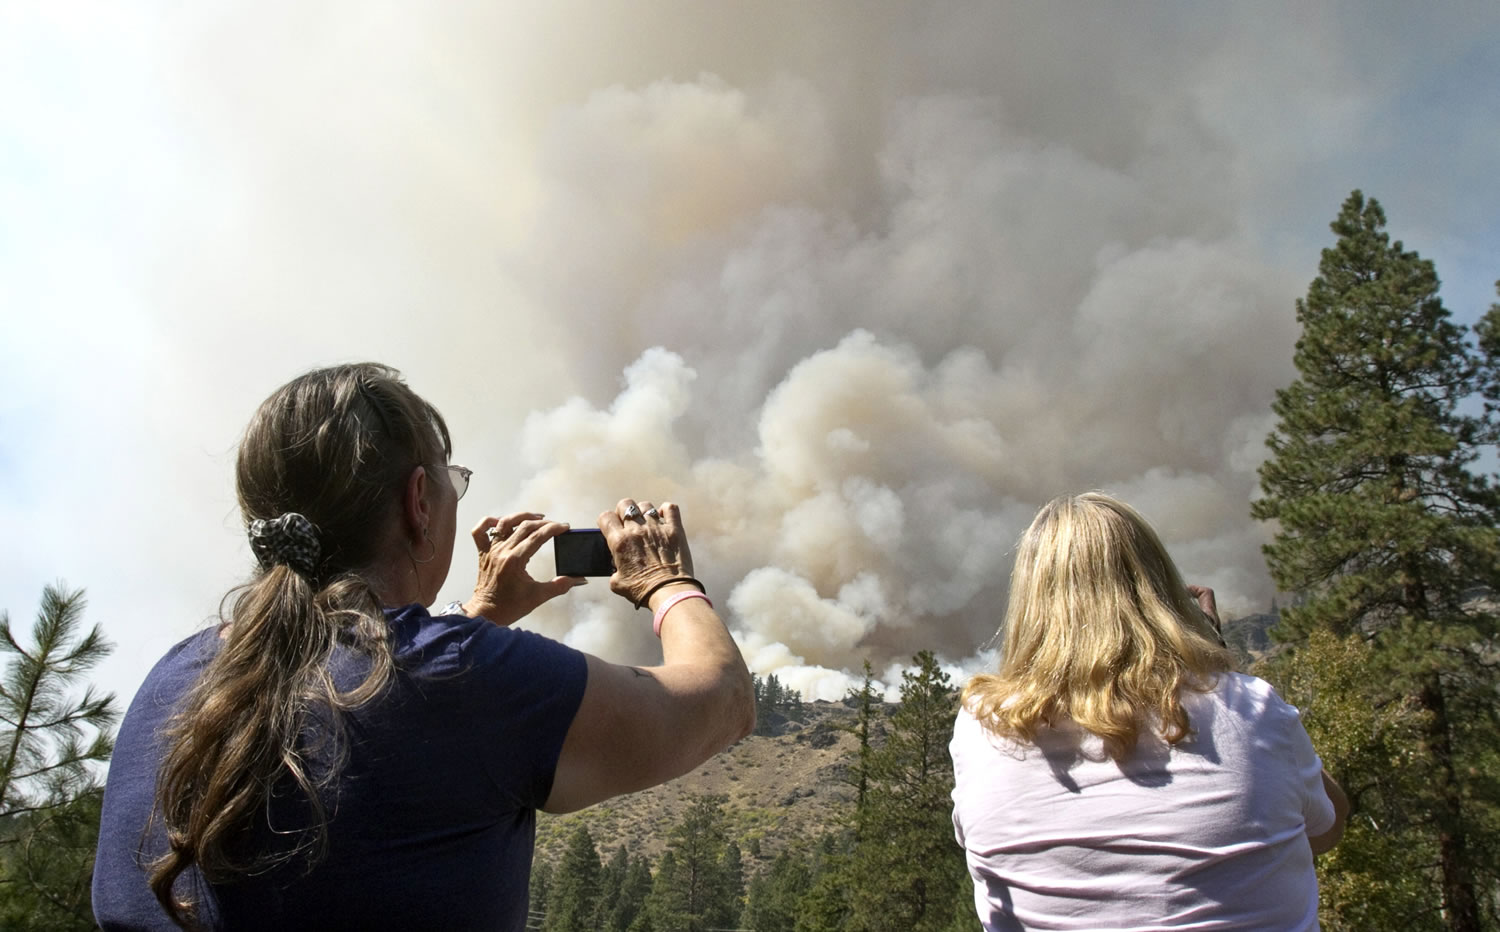 Vicky Olse, left, and Linda Bowers take photos of the Wild Rose Fire along U.S. Highway 12 west of Naches on Sunday.